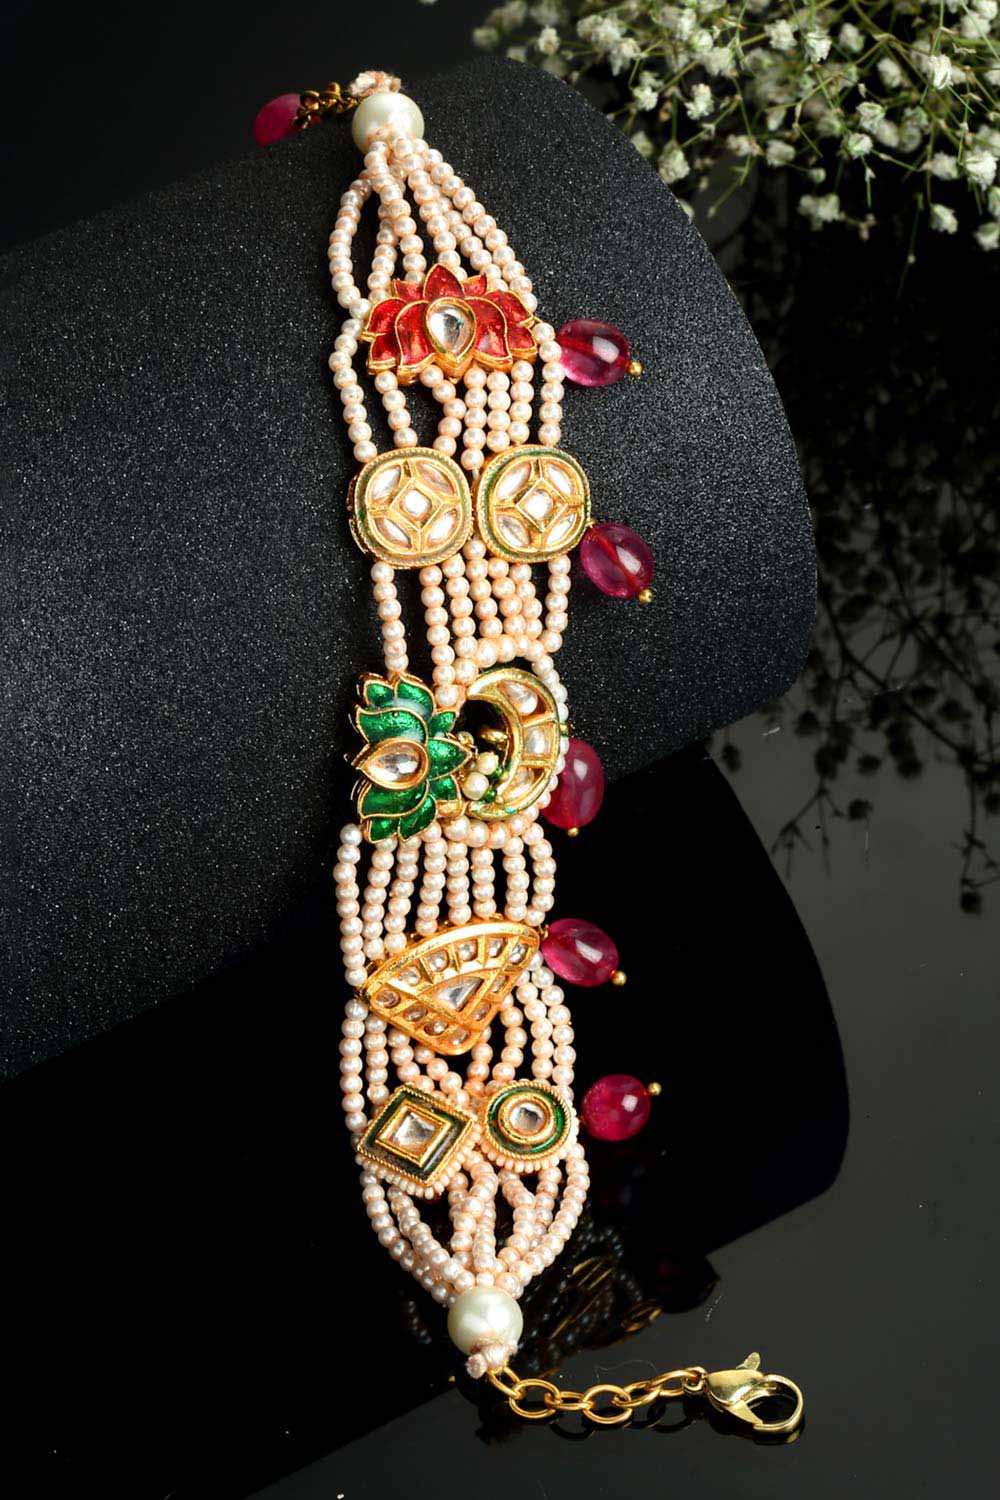 Pink Gold-Plated Kundan And Pearls Bracelet